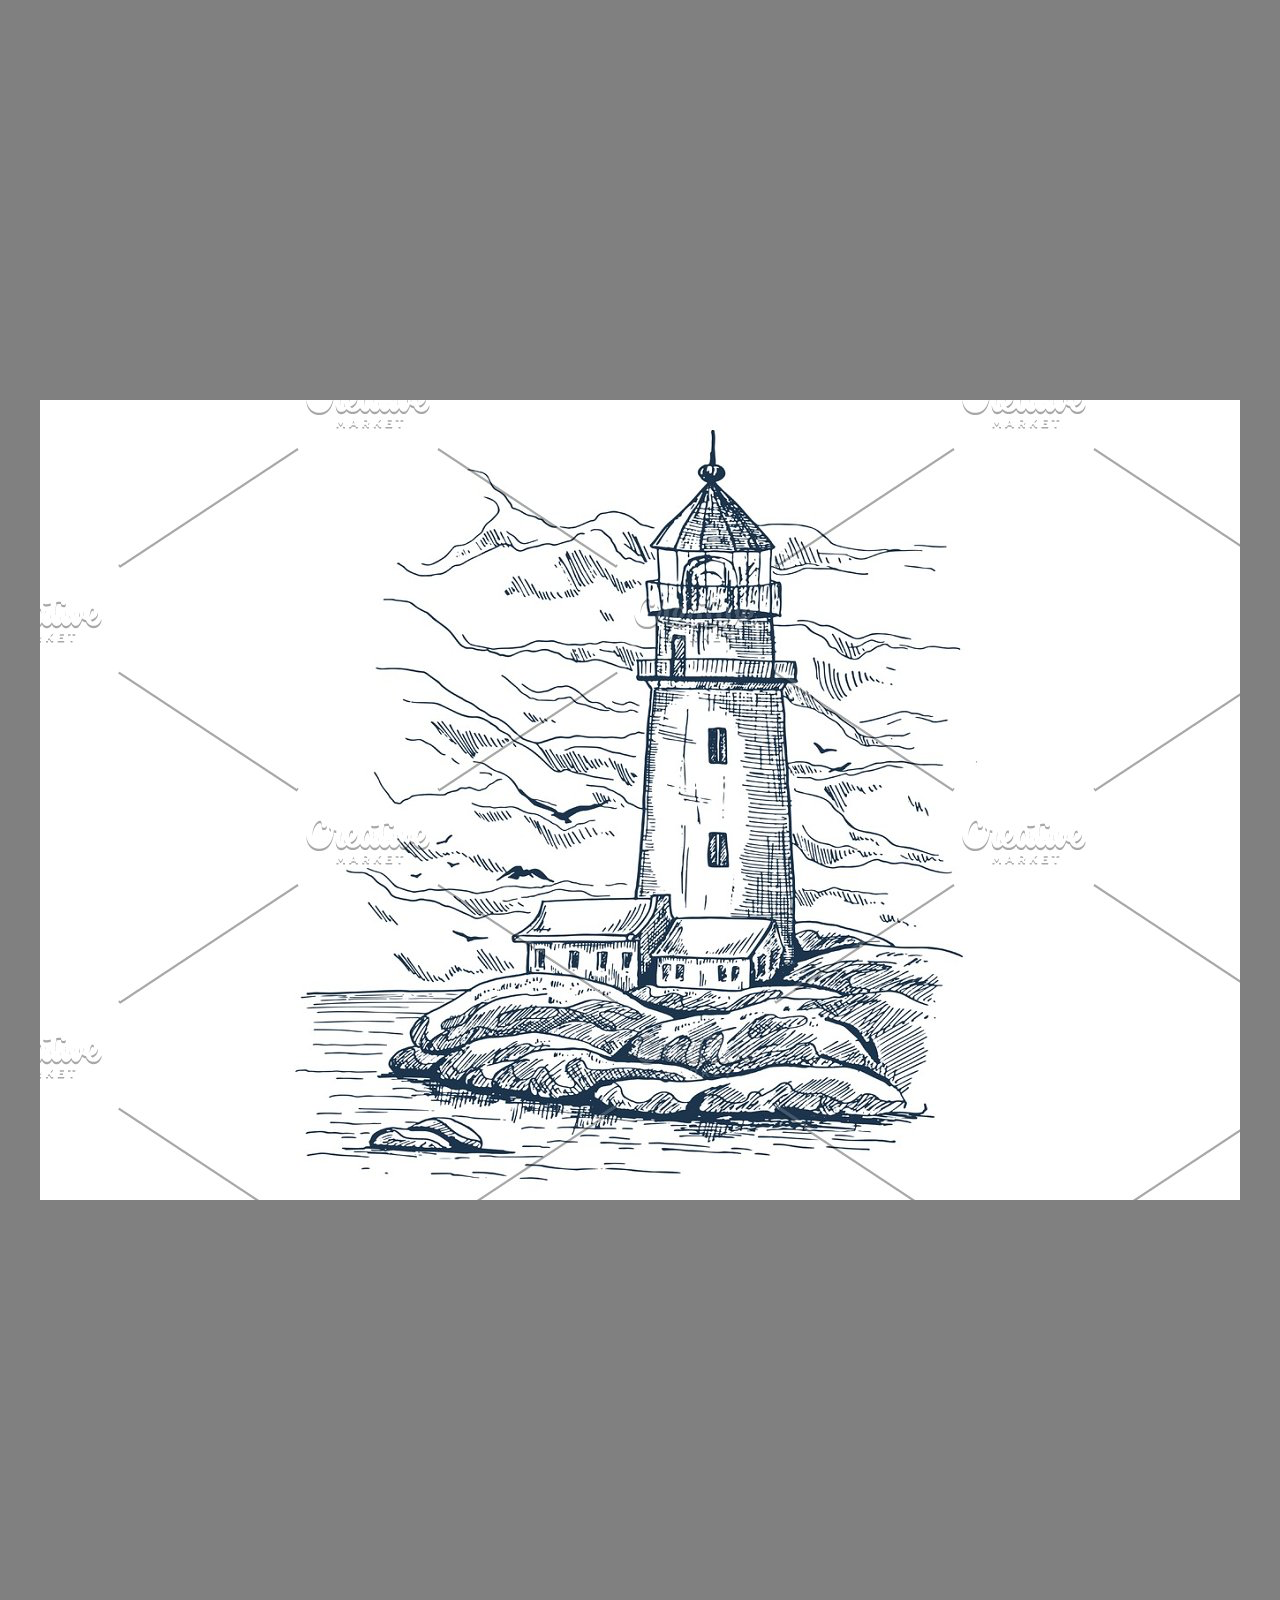 Beacon or harbor lighthouse sketch on island pinterest image preview.